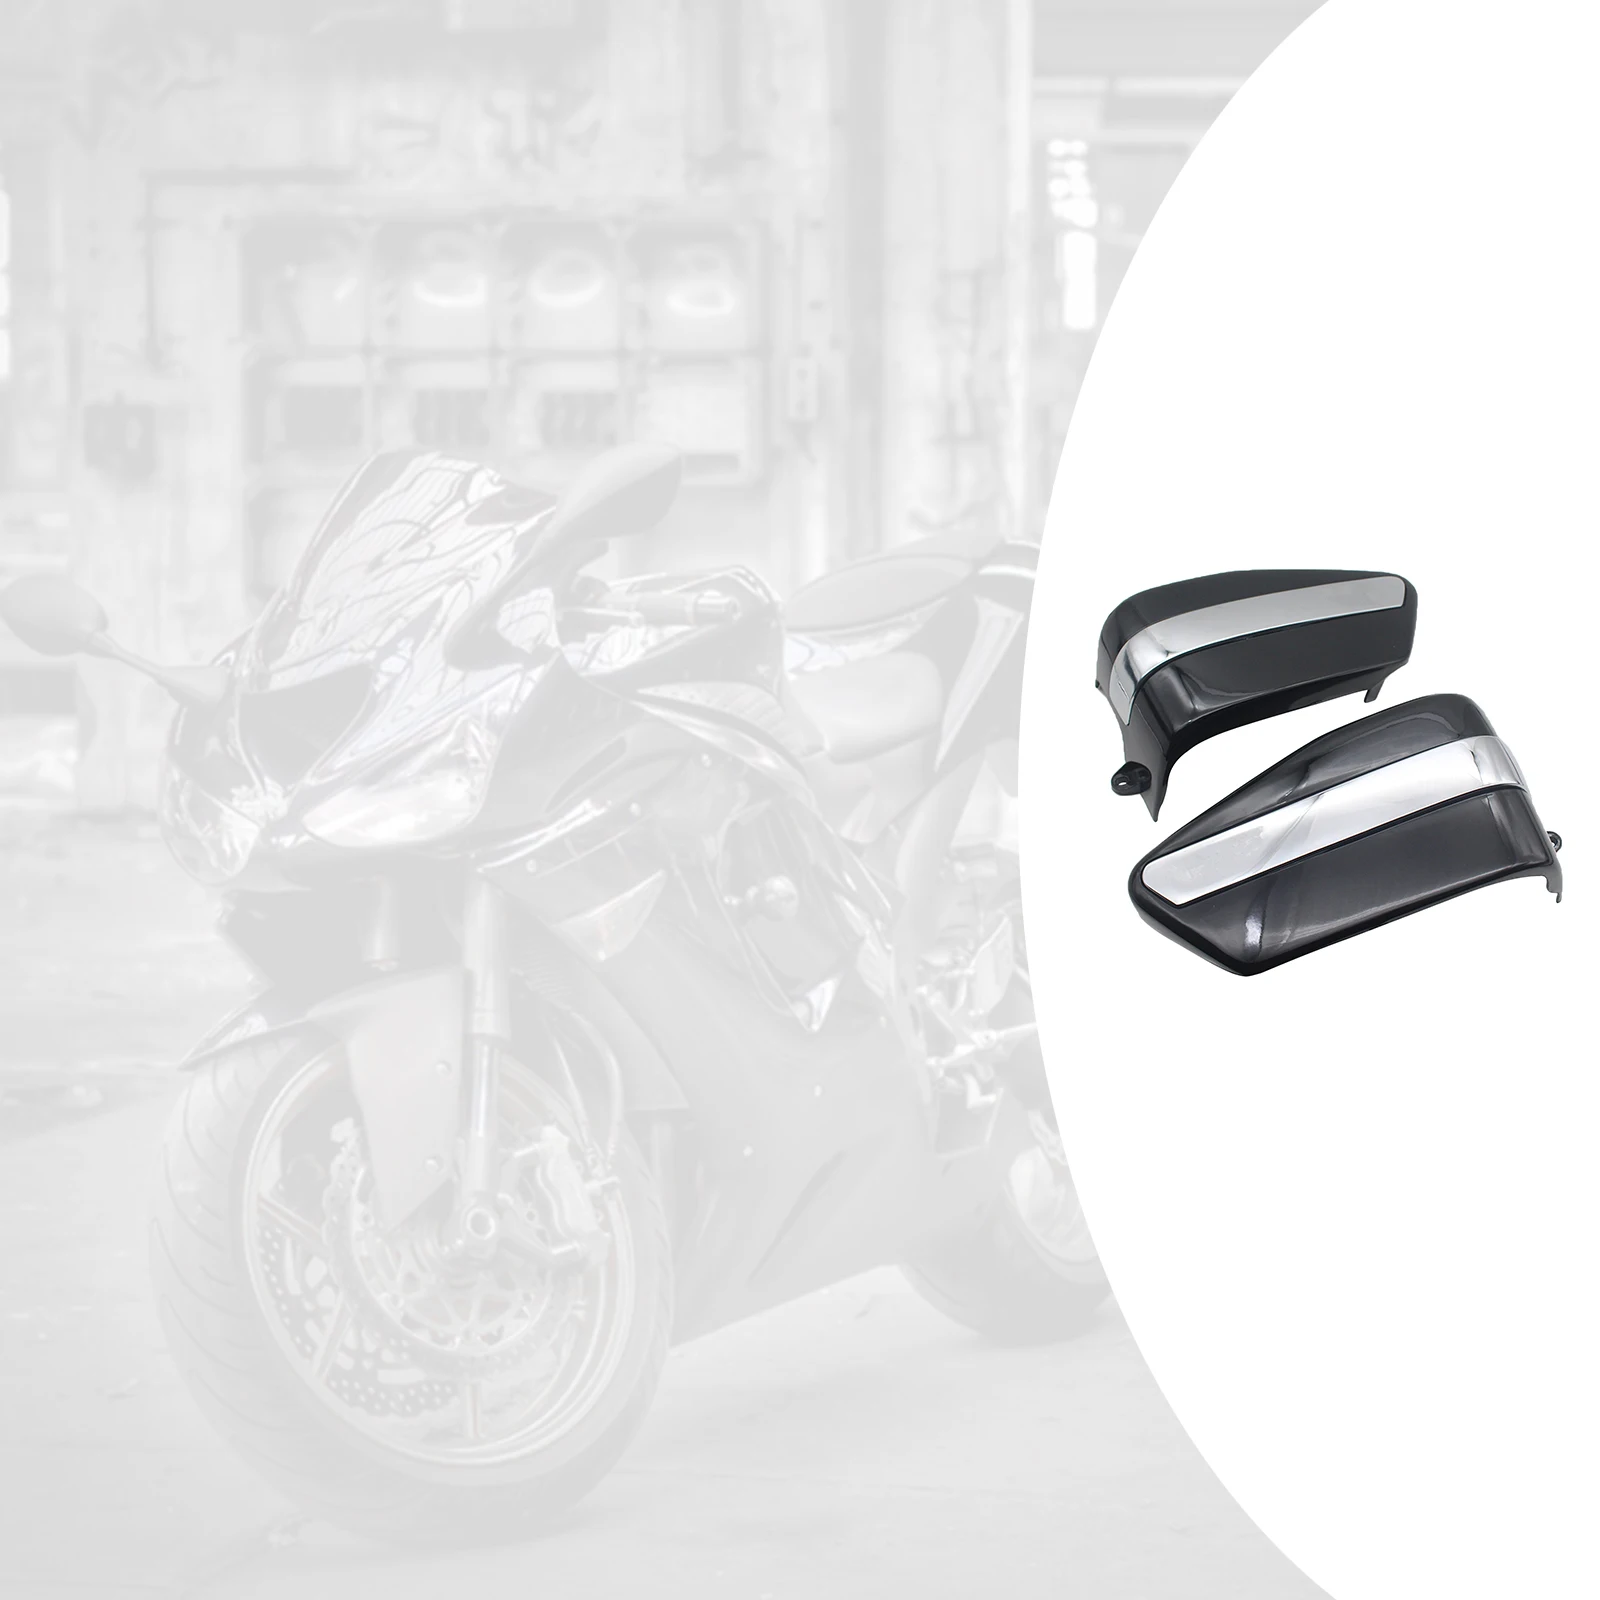 Motorcycle Battery Covers - Left & Right Pair for Honda Rebel CMX250 CA250 199 - $39.11